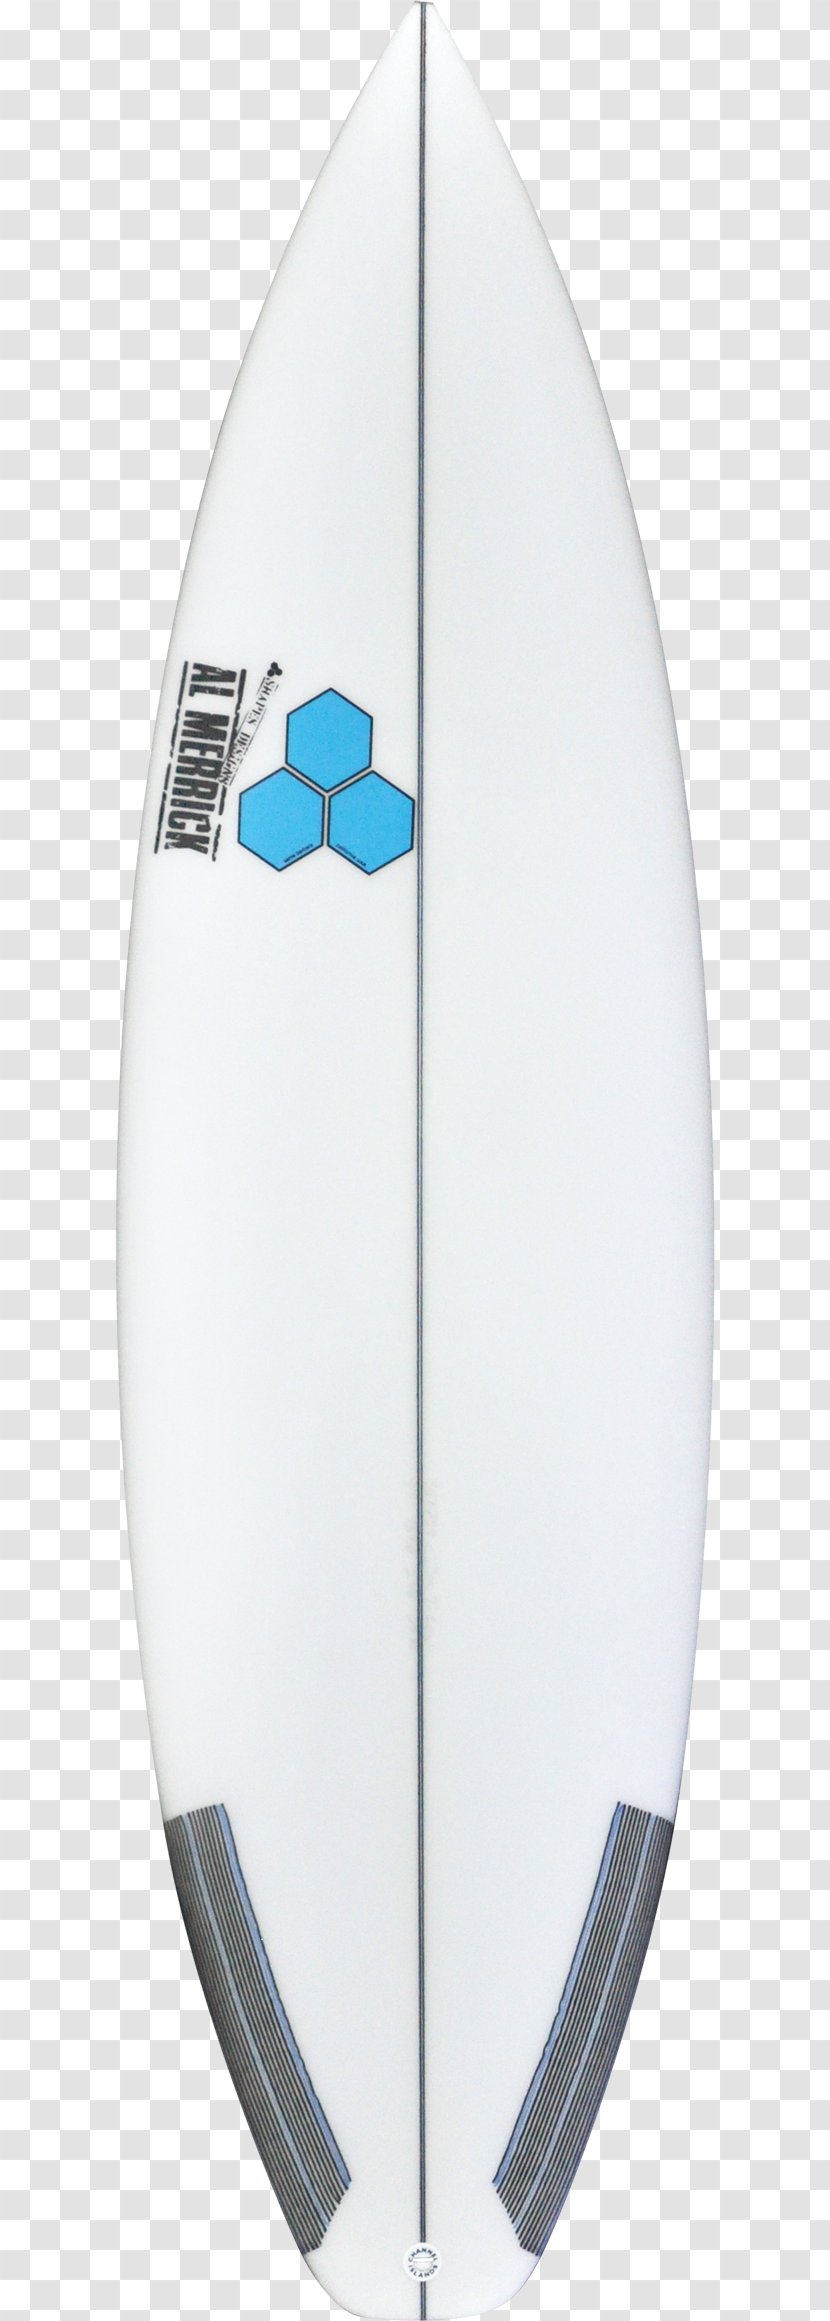 Surfboard Diving & Swimming Fins Channel Islands - Fin Transparent PNG